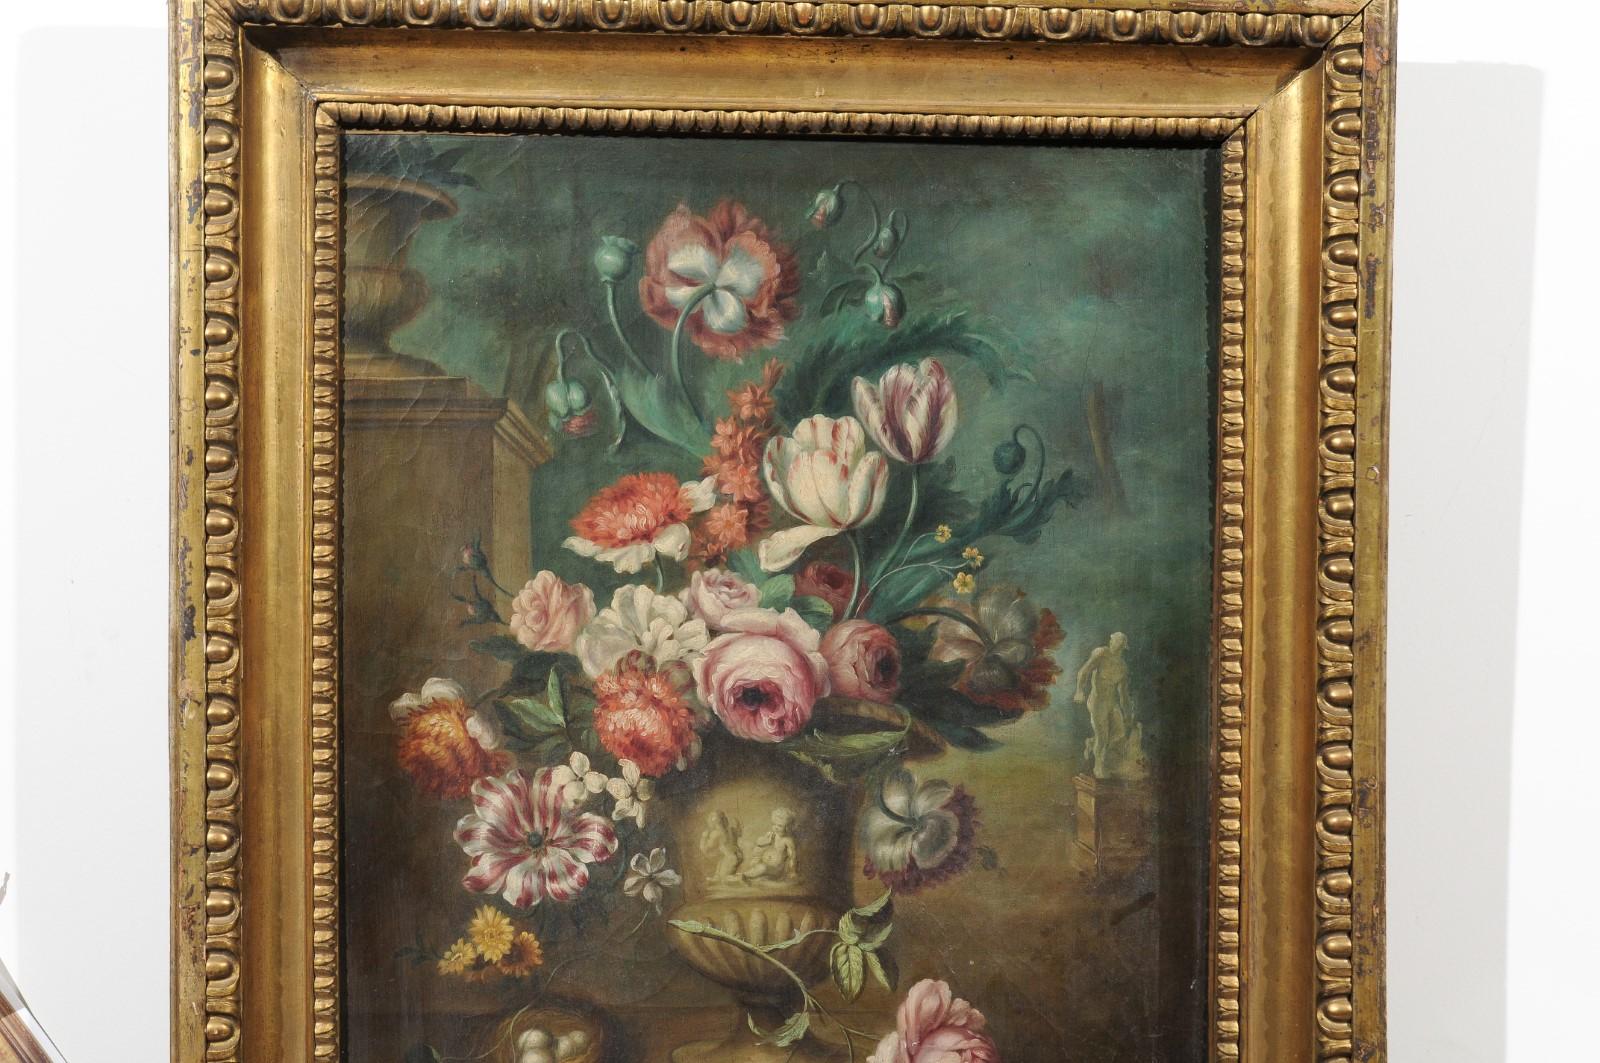 19th Century French Framed Still-Life Oil Painting Depicting a Bouquet of Flowers, circa 1850